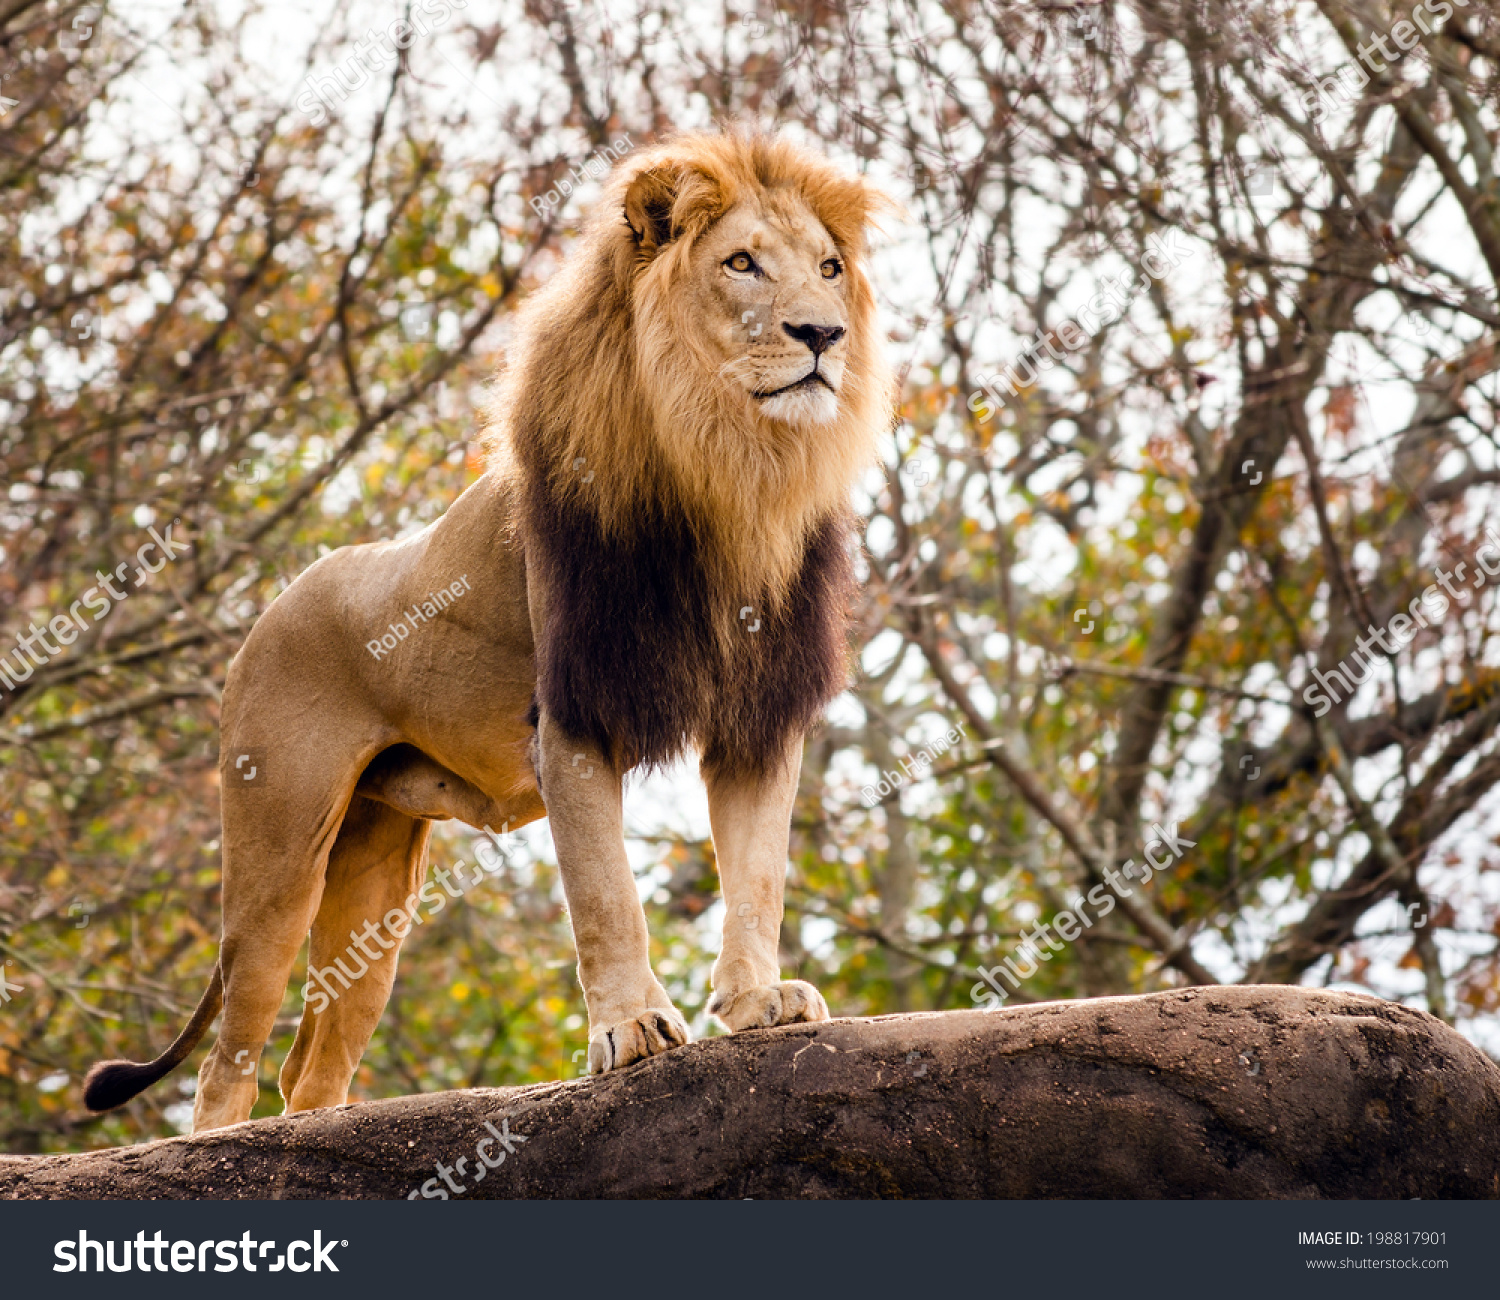 stock-photo-male-lion-looking-out-atop-rocky-outcrop-198817901.jpg